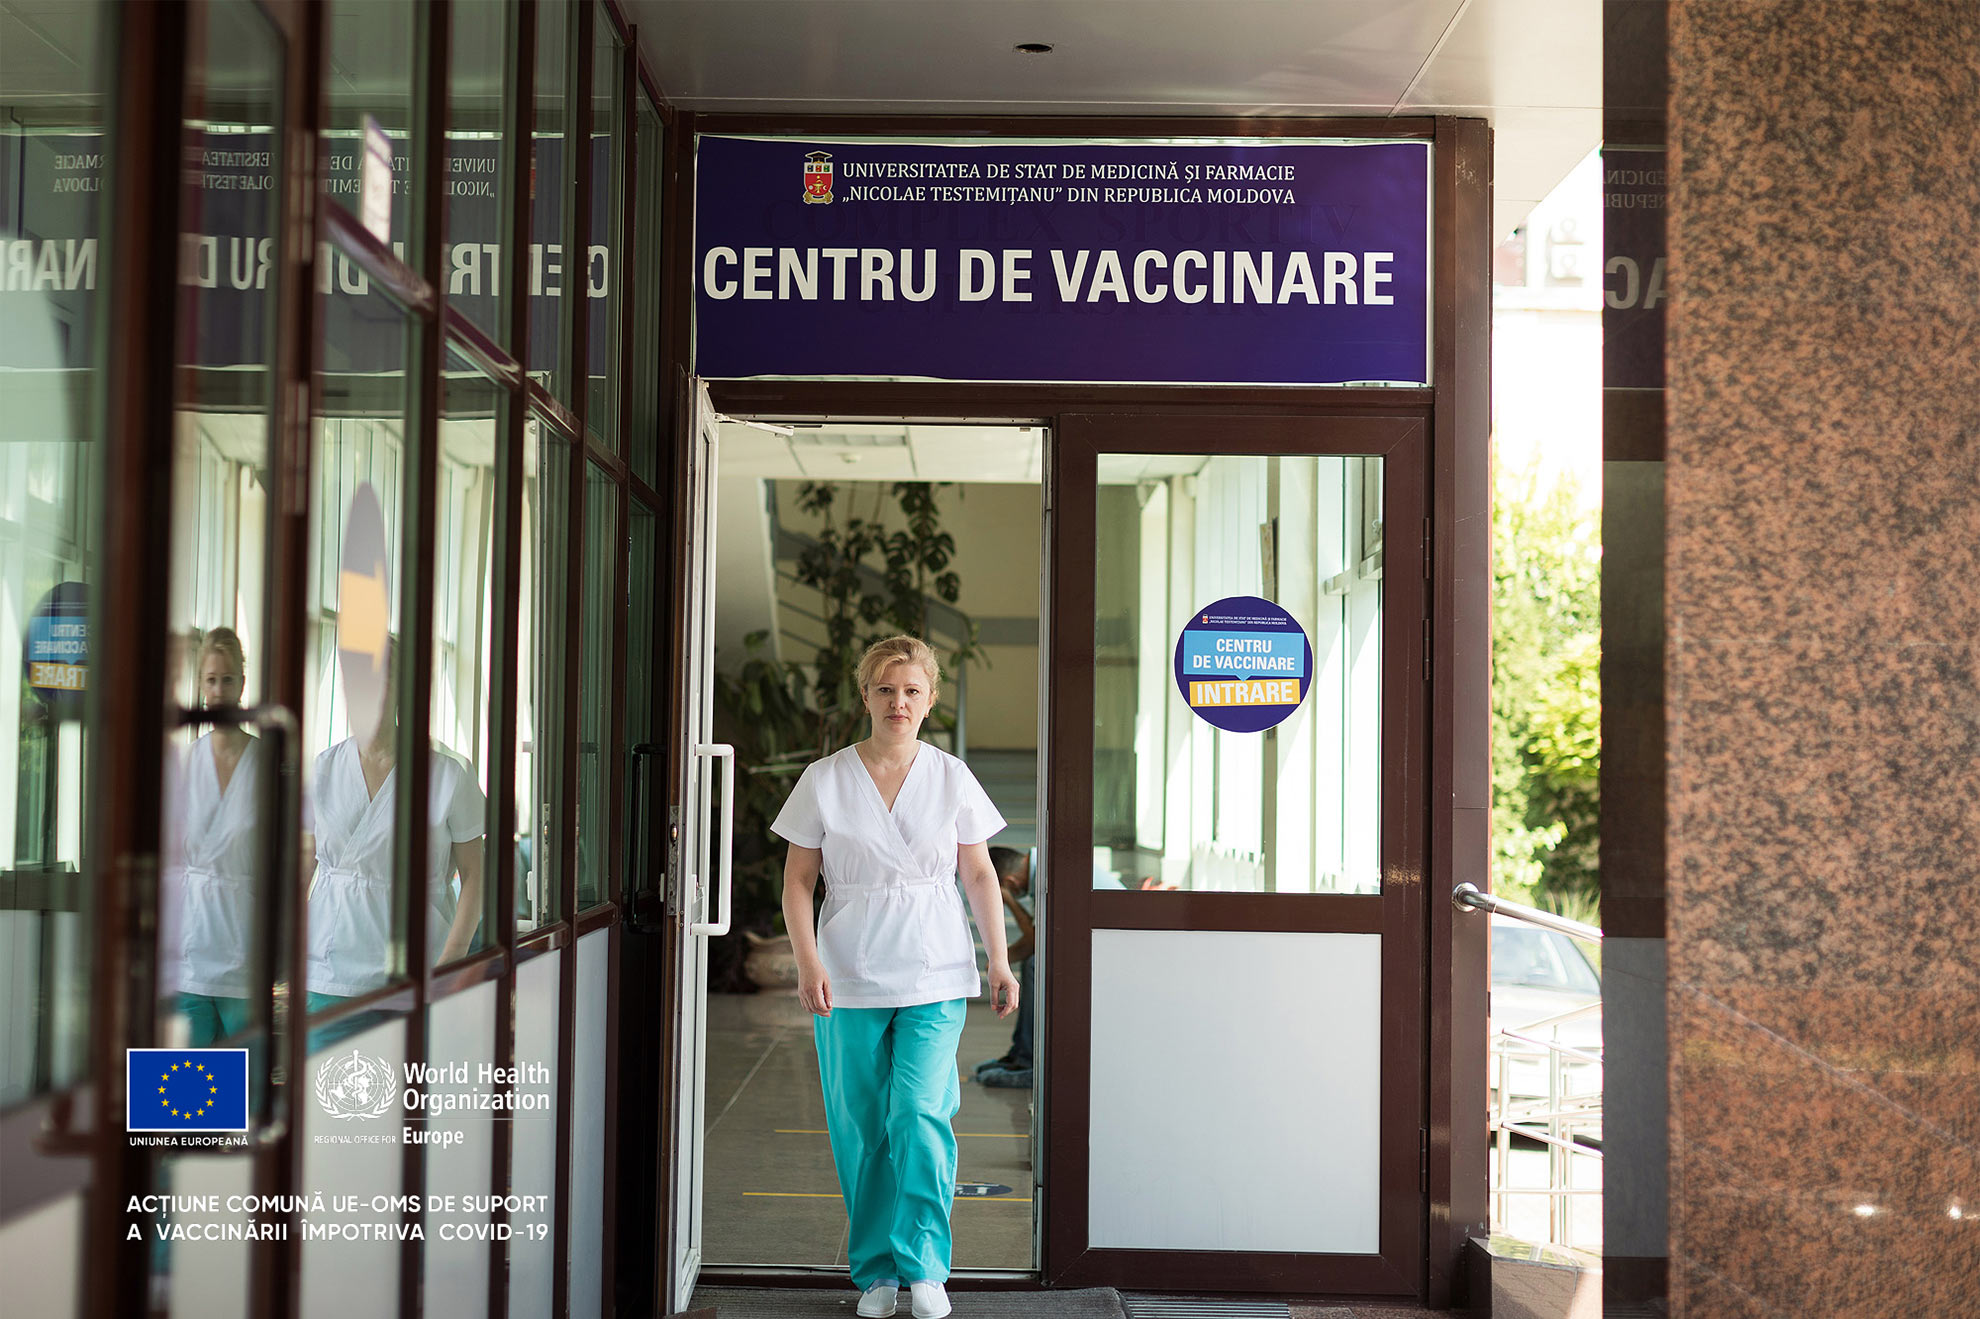 Partnering with the European Union to support deployment of COVID-19 vaccines and vaccination